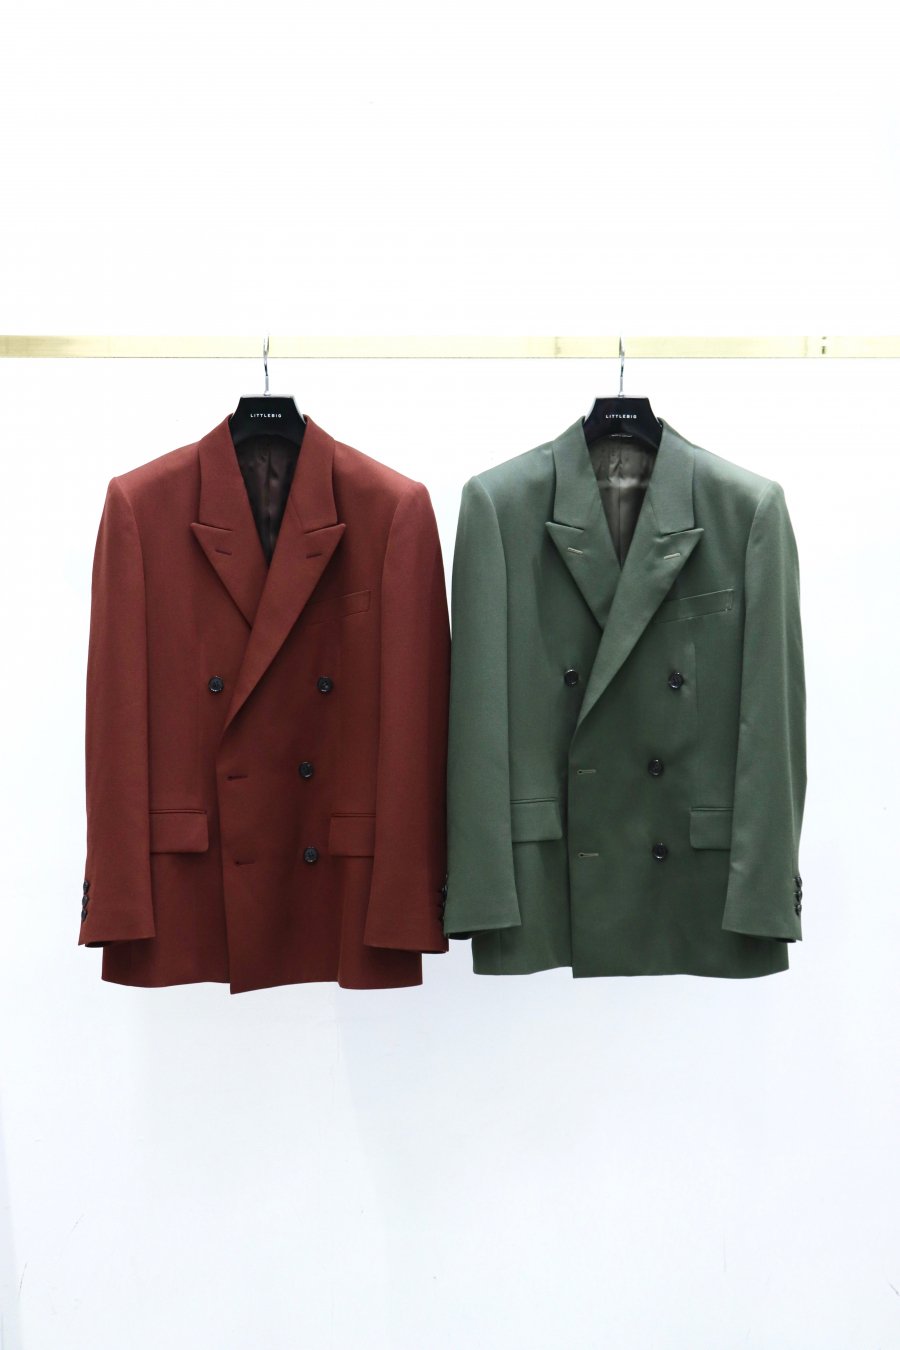 LITTLEBIG（リトルビッグ）のTwill 6B Double Breasted Jacket（ツイル 